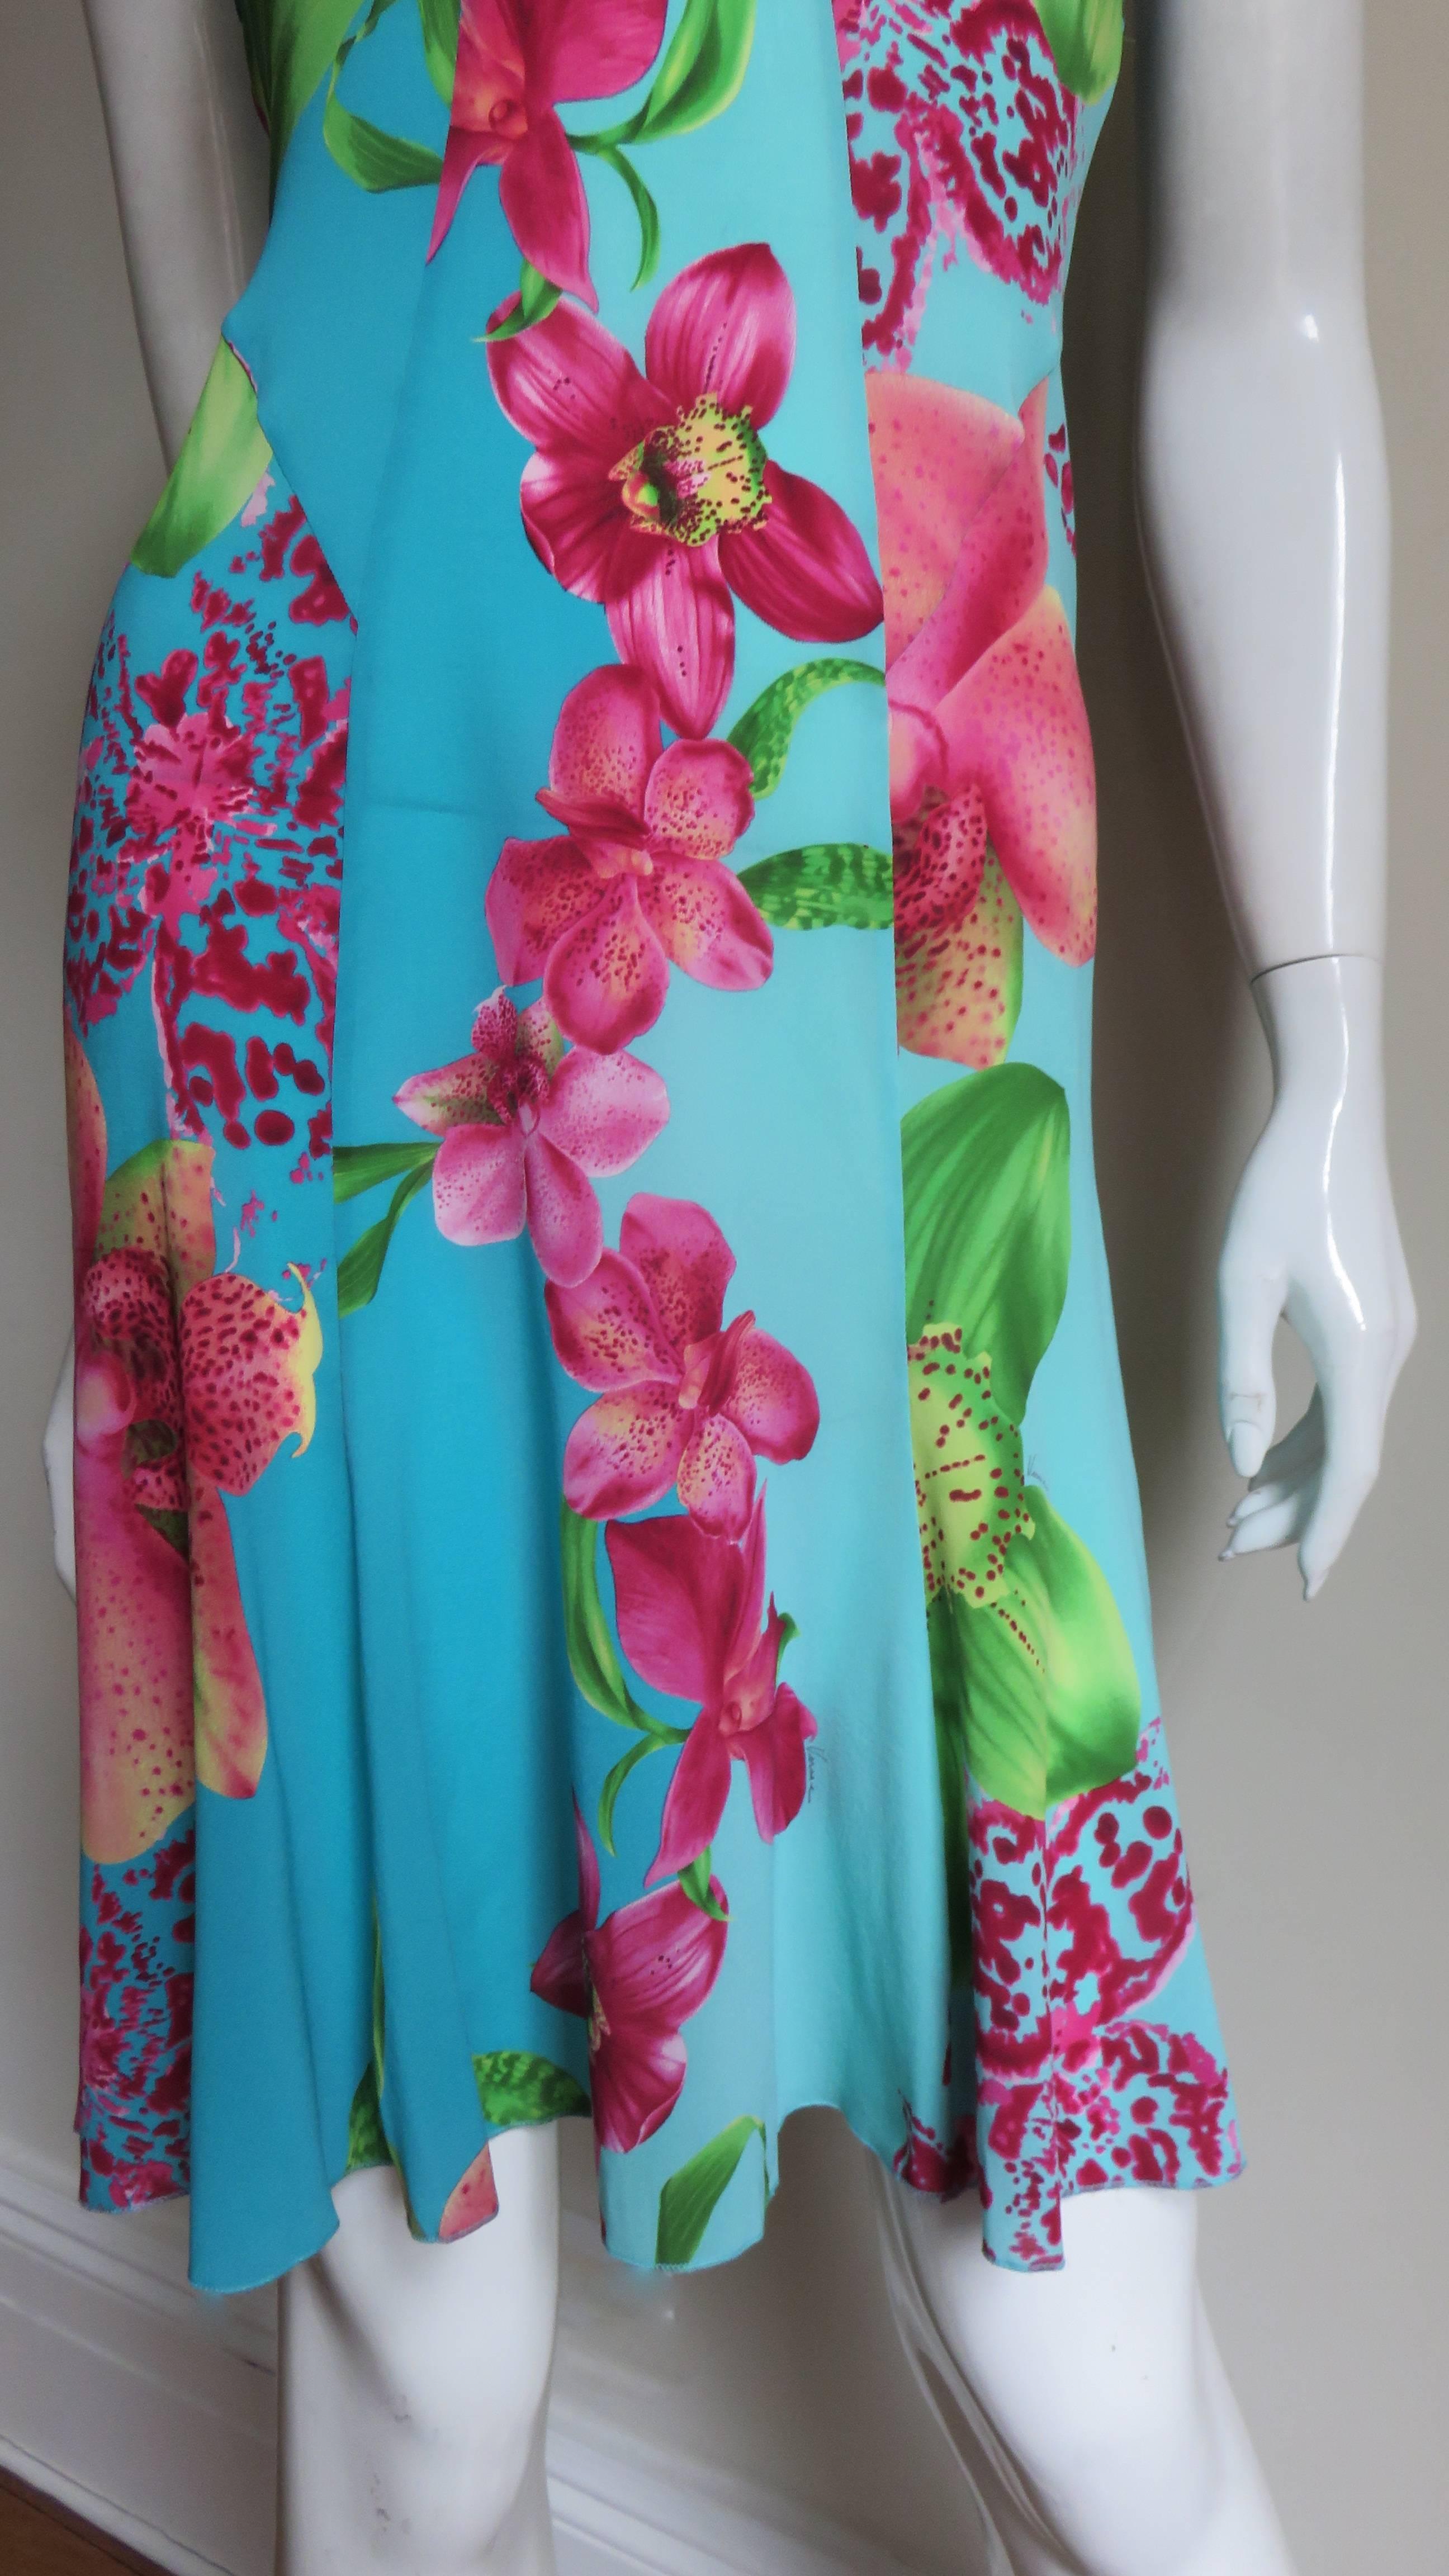 Versace Silk Halter Dress with Embroidery In Good Condition For Sale In Water Mill, NY